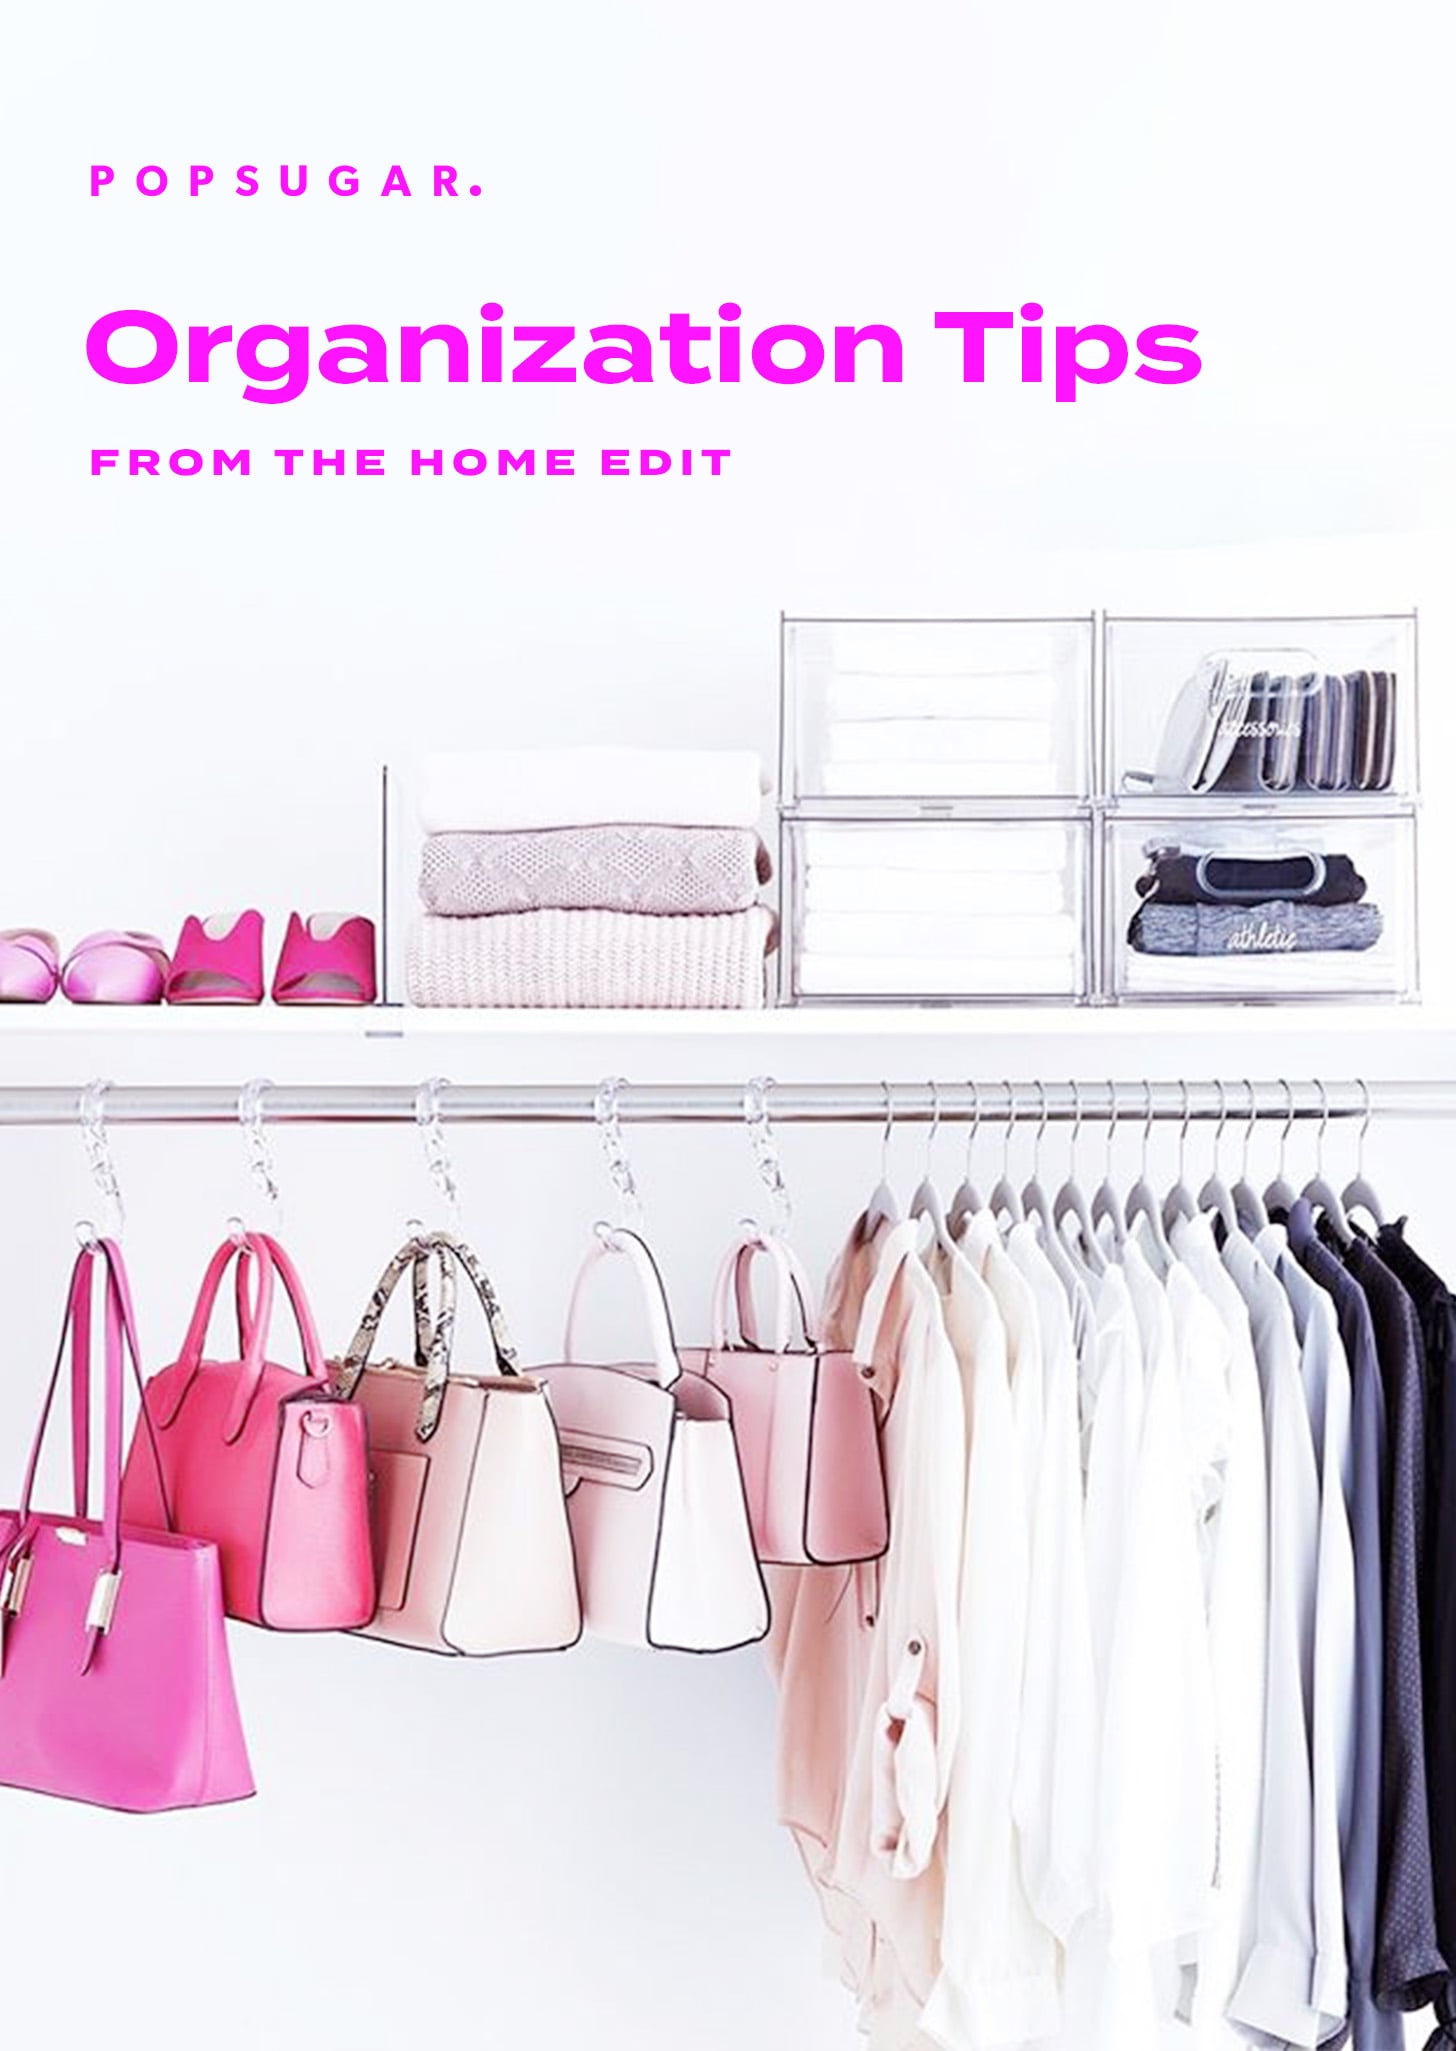 Bobby Pin Storage - 31 Days of Organizing and Cleaning Hacks